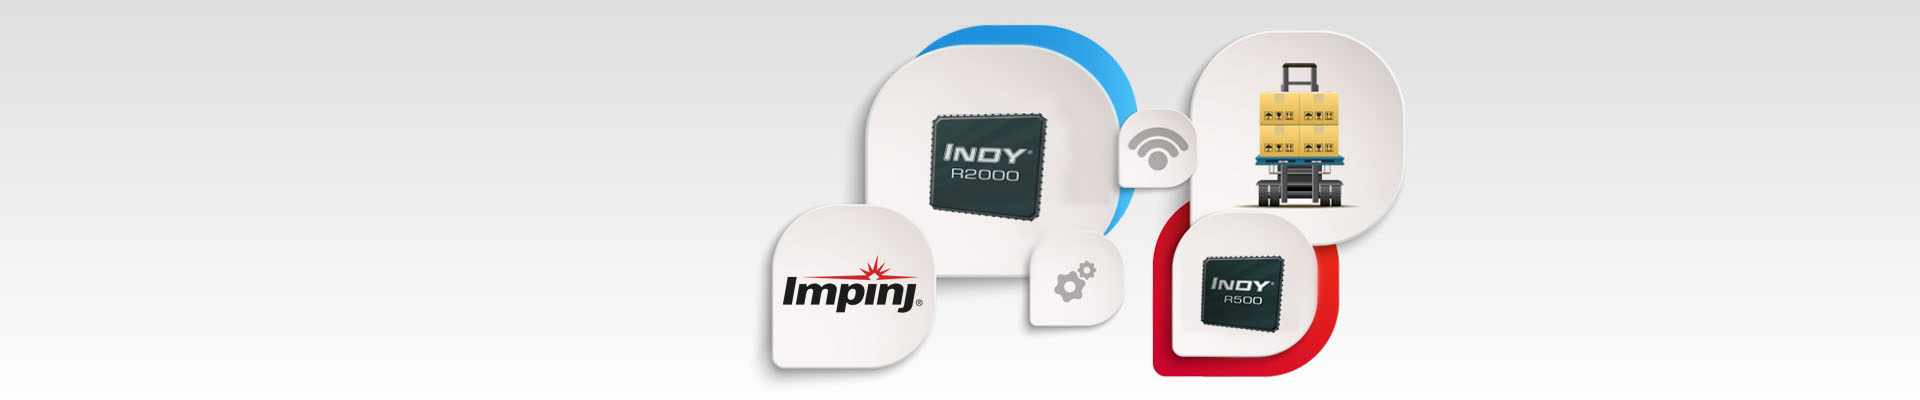 Distributor of<br>Impinj RFID Products<br><br>